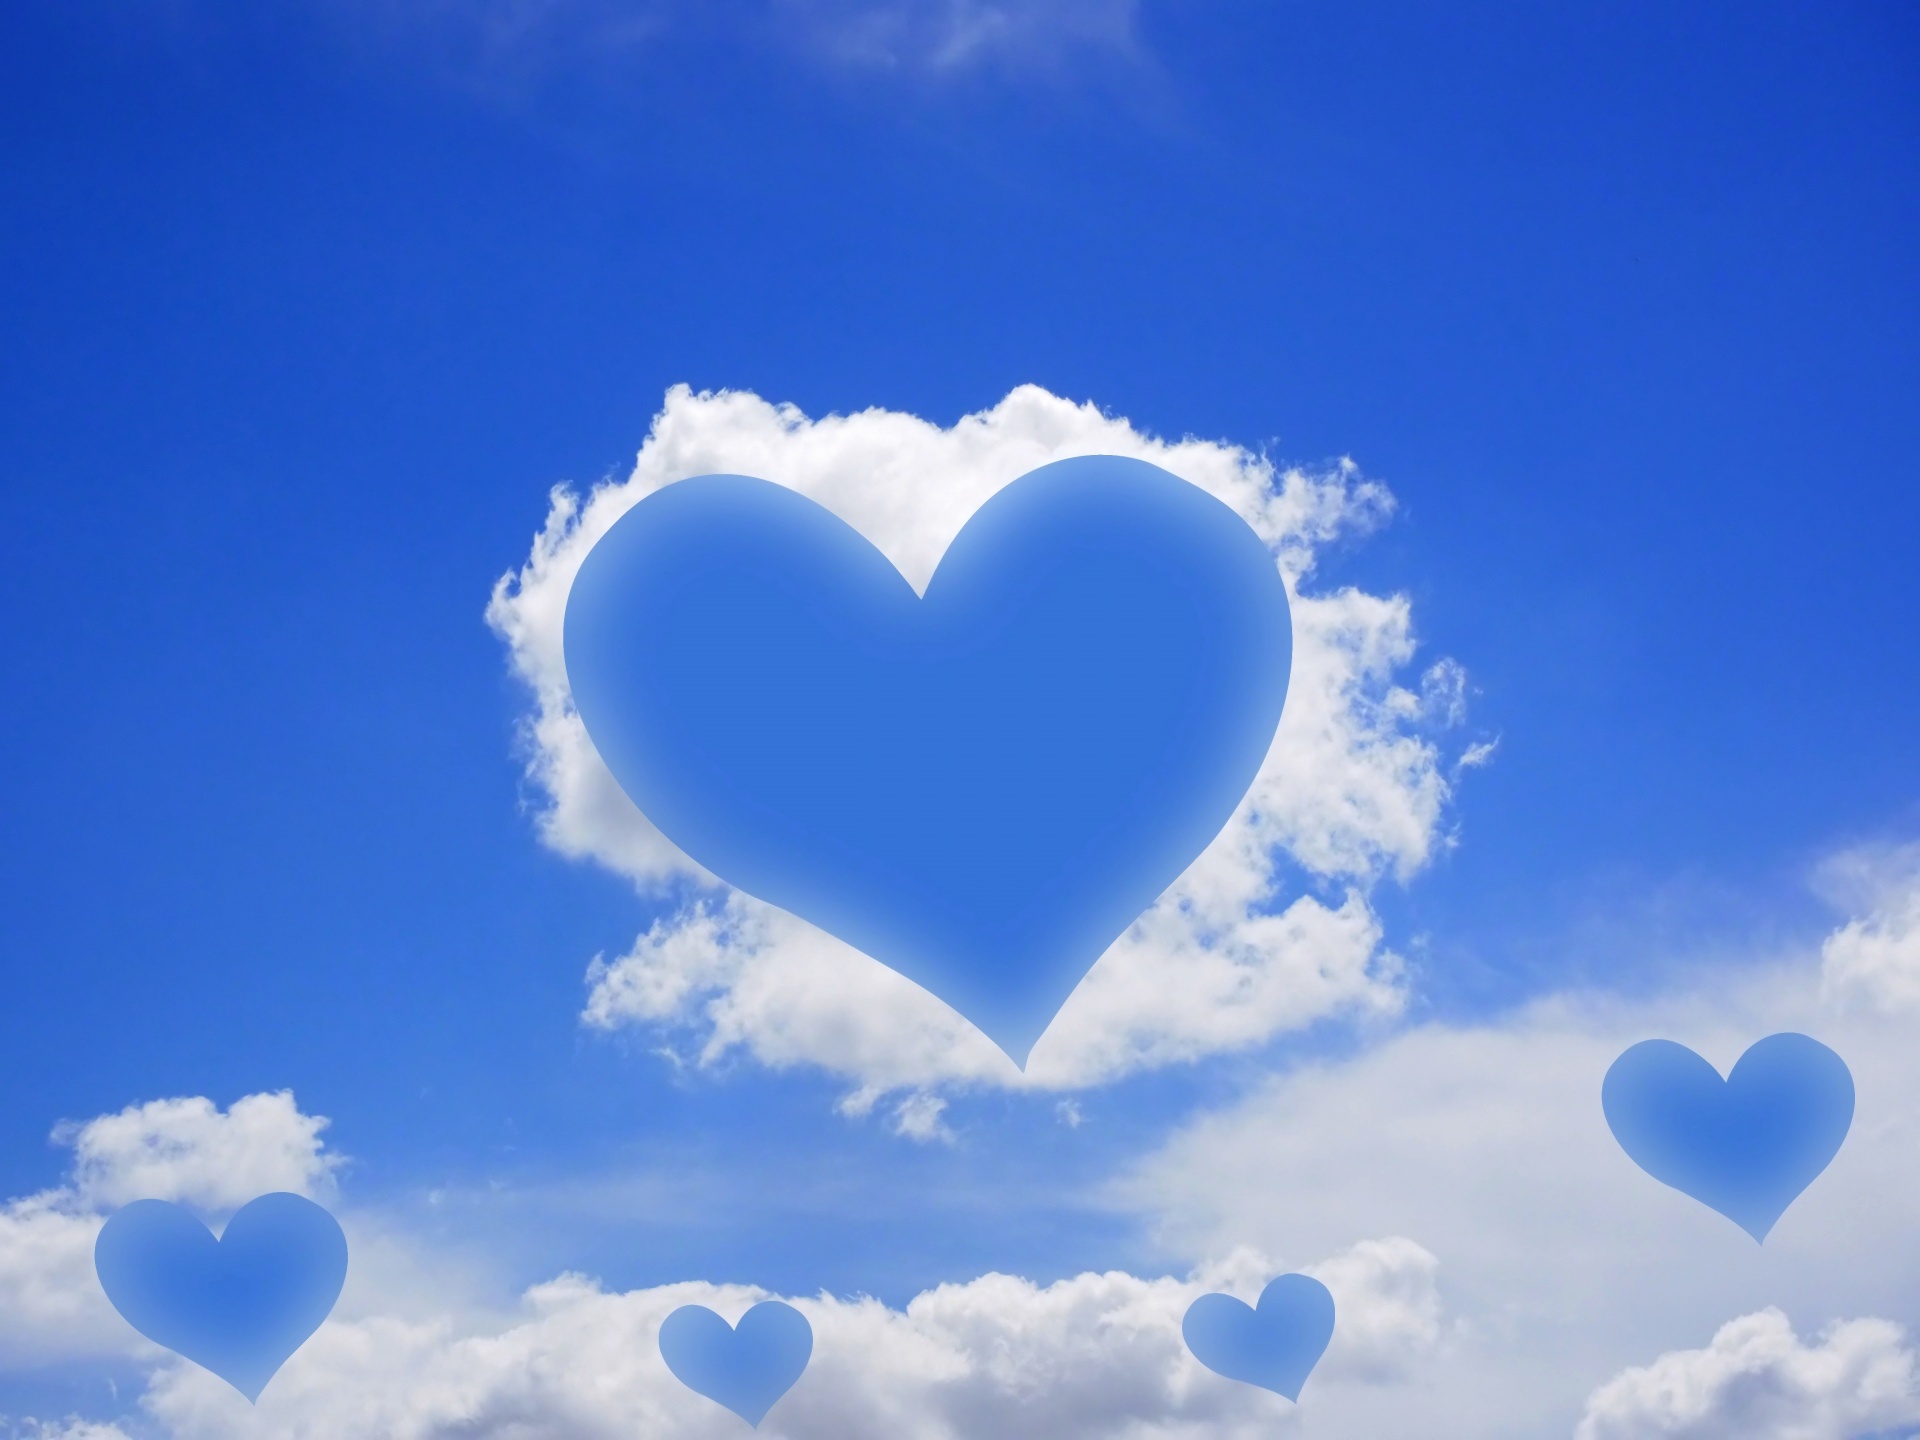 Download free photo of Clouds, sky, heart, hearts, love